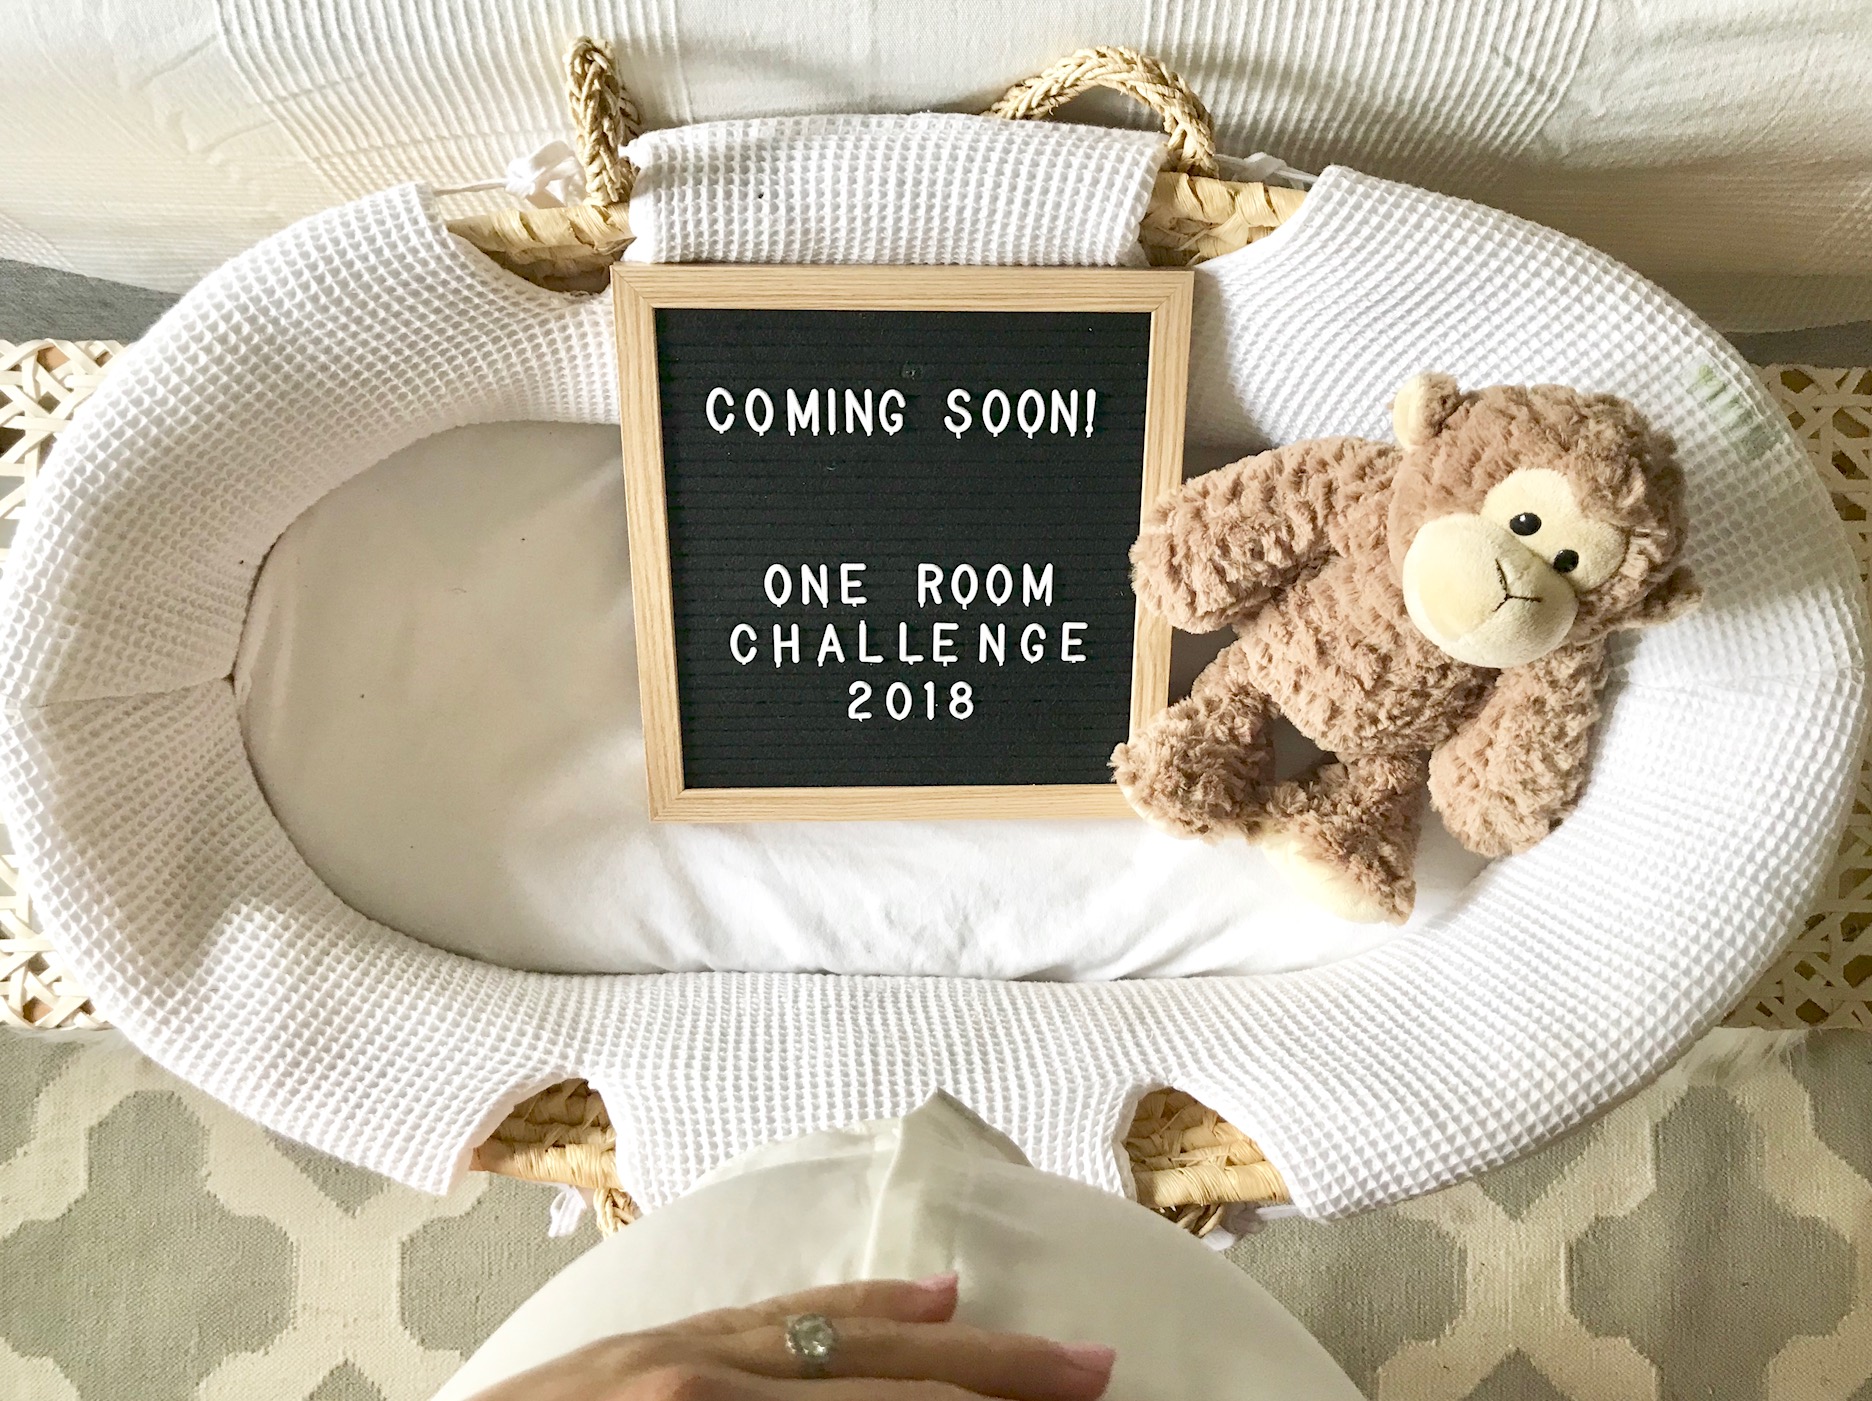 Along with getting everything in place for this awesome One Room Challenge, this mama is busy getting everything ready in our home to welcome this new babe!&nbsp;